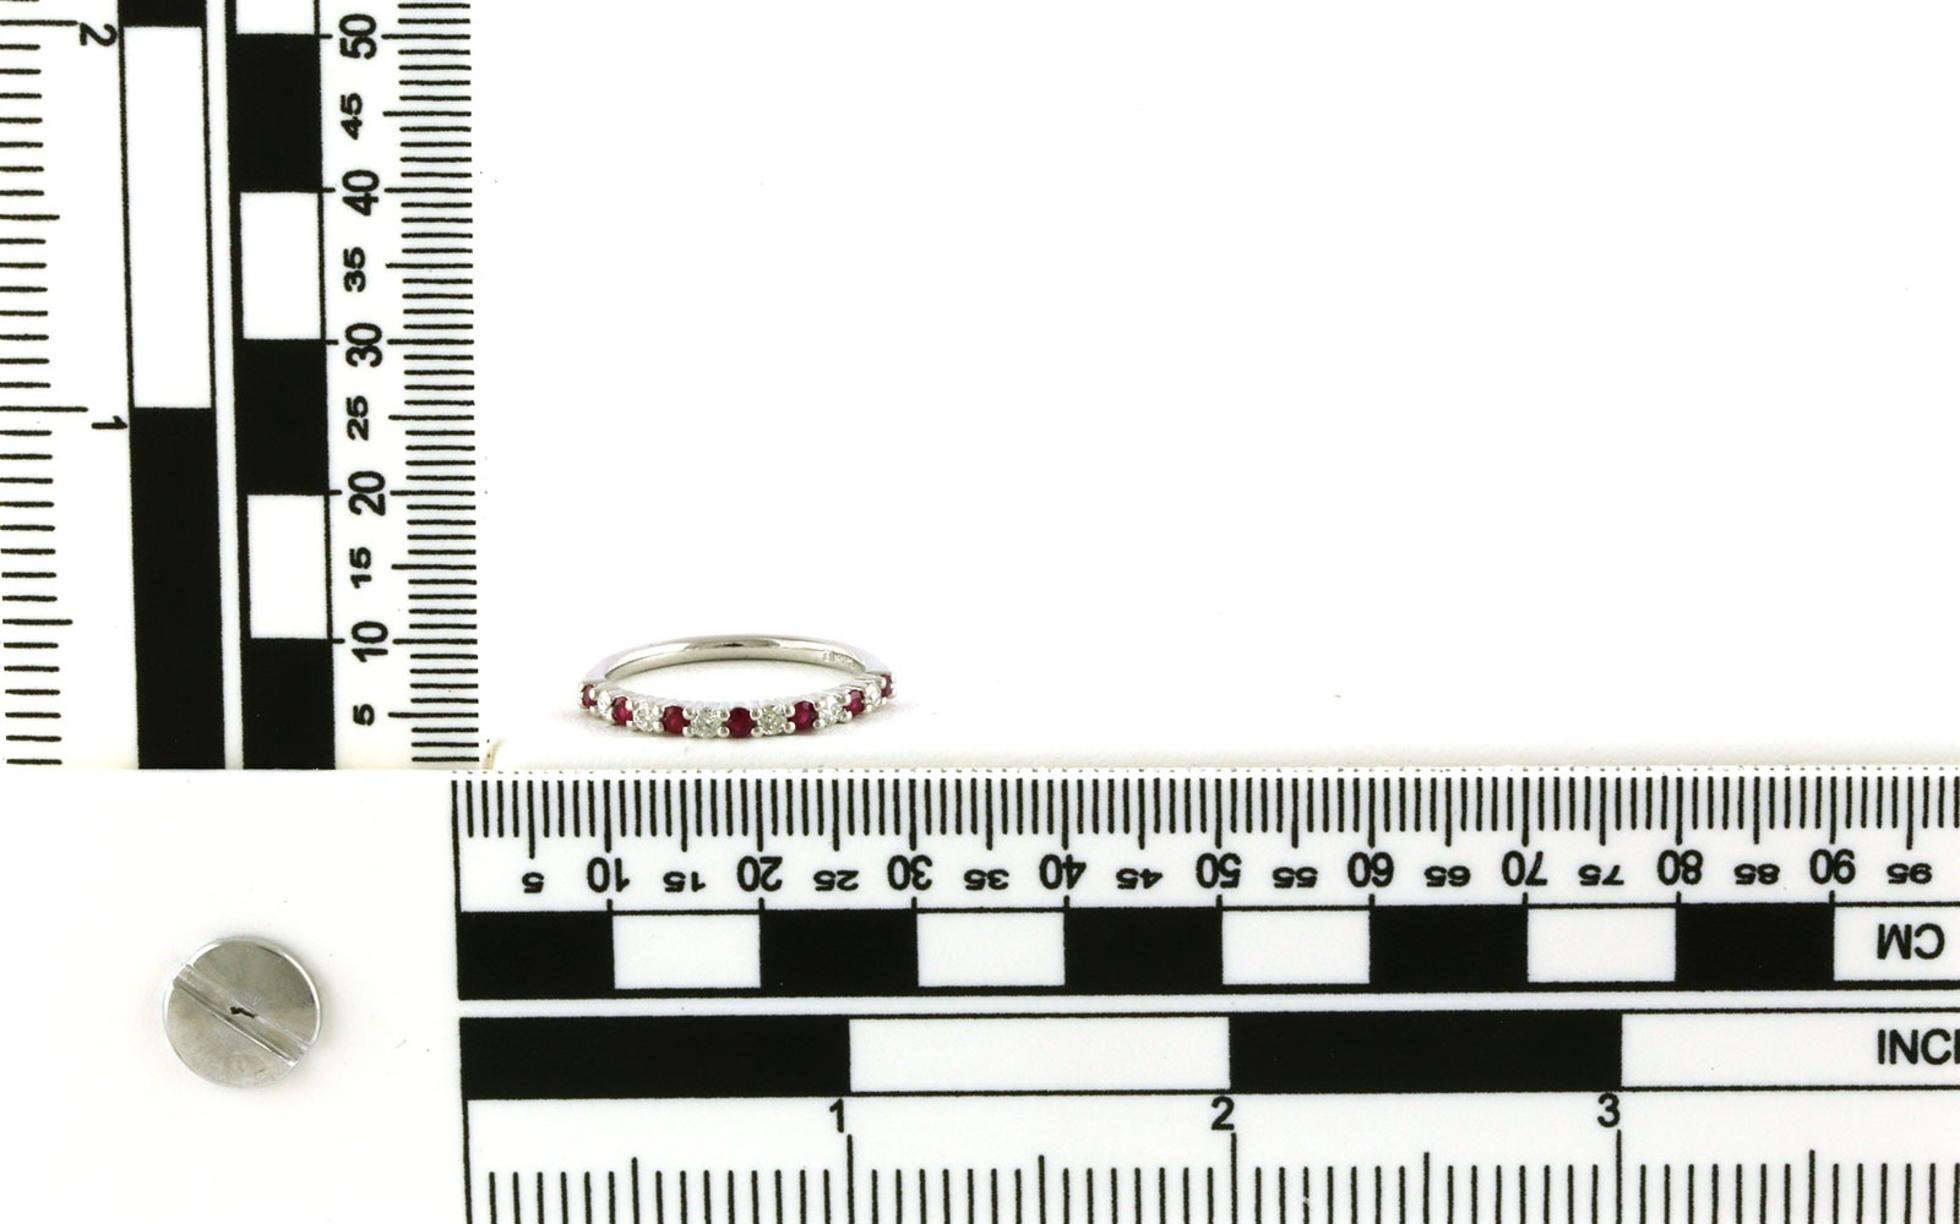 13-Stone Alternating Ruby and Diamond Wedding Band in White Gold (0.47cts TWT) Scale